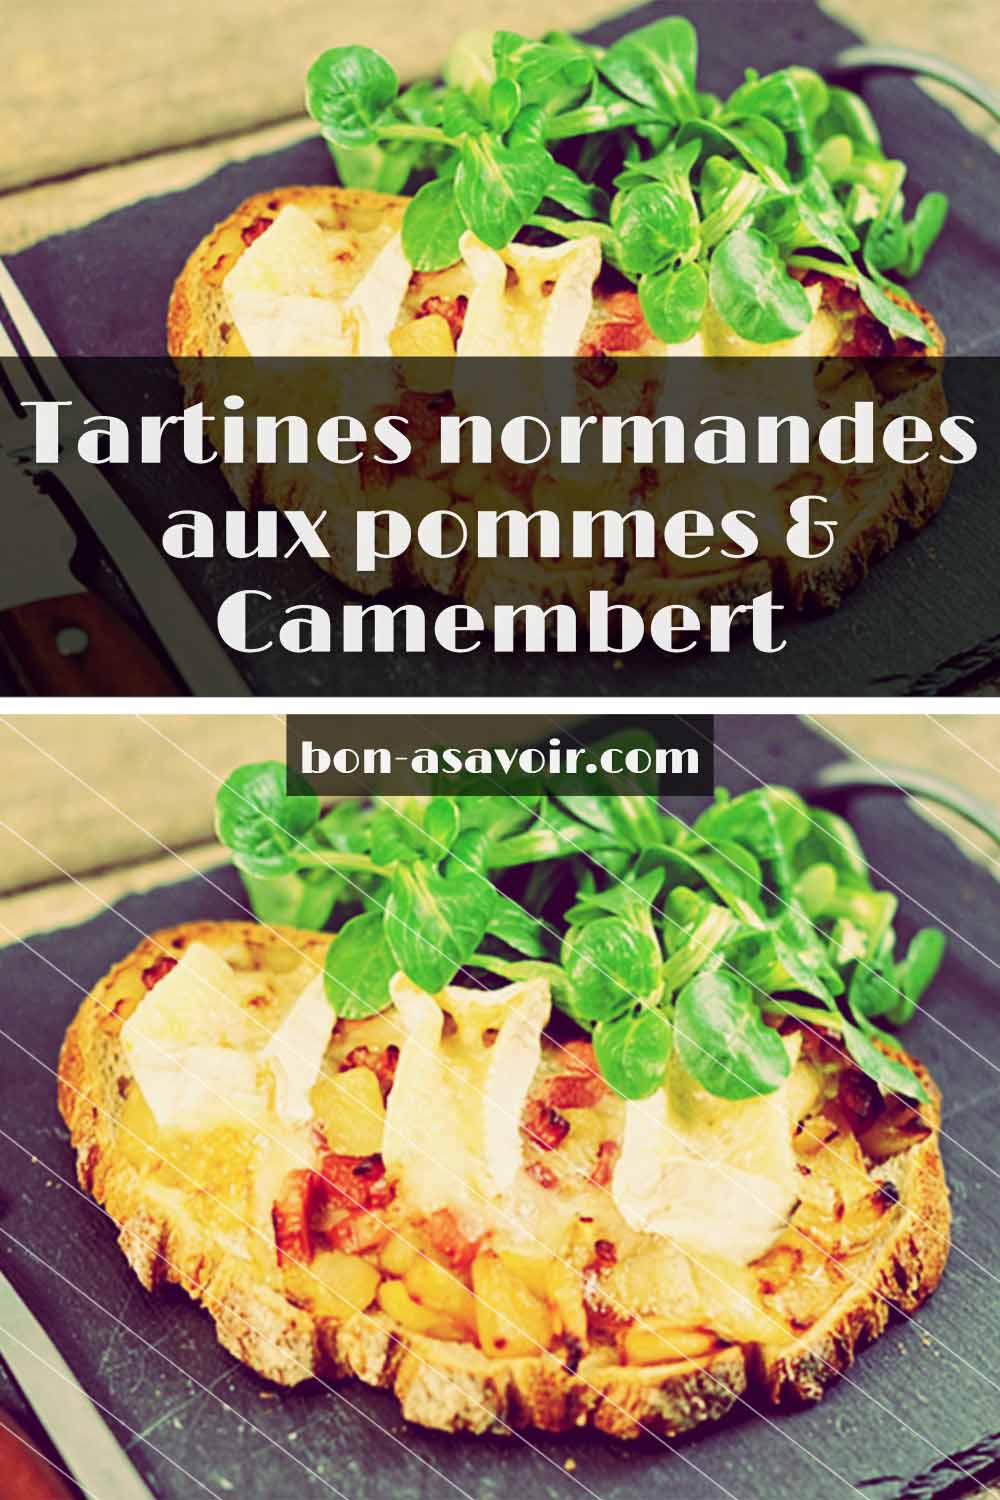 Tartines normandes aux pommes & Camembert